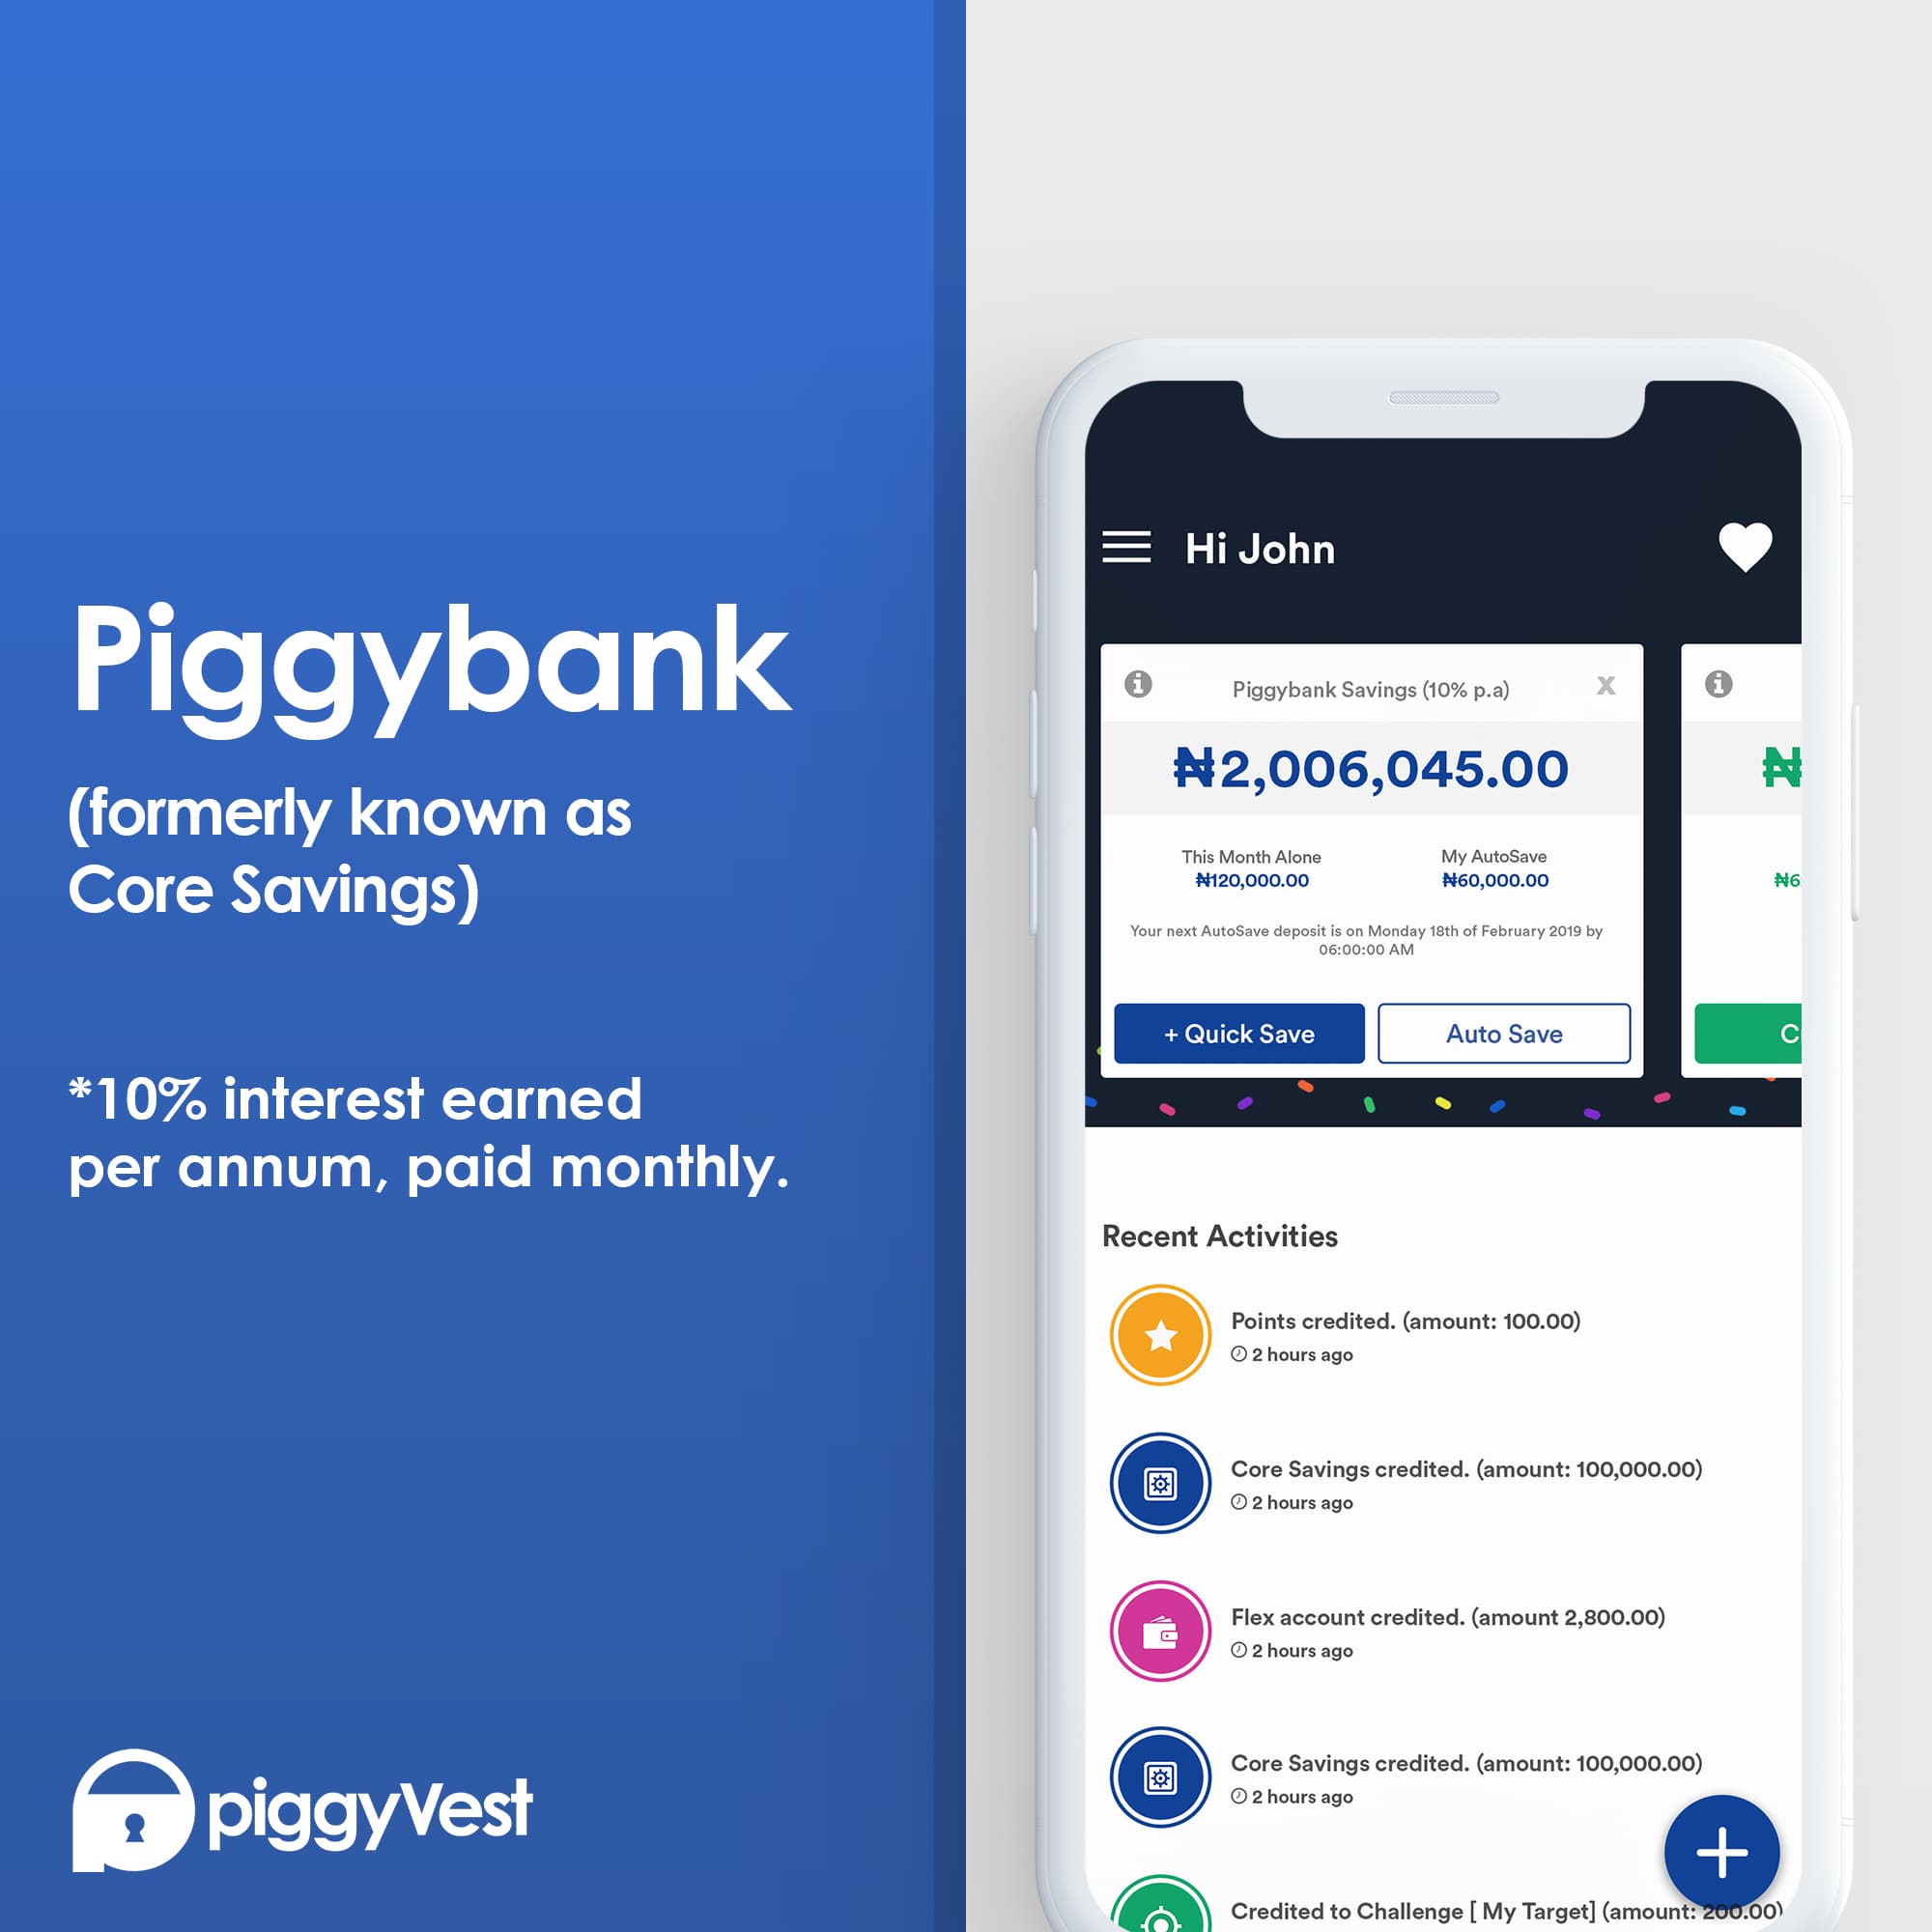 Piggyvest On Twitter: &Quot;We Are Still The Same Https://T.co/Gqbh7Pf0L4, Just  Better. To Use The Piggyvest App, Simply Update Your Current App And Use  The Same Login Details. Remember Your Core Savings? It